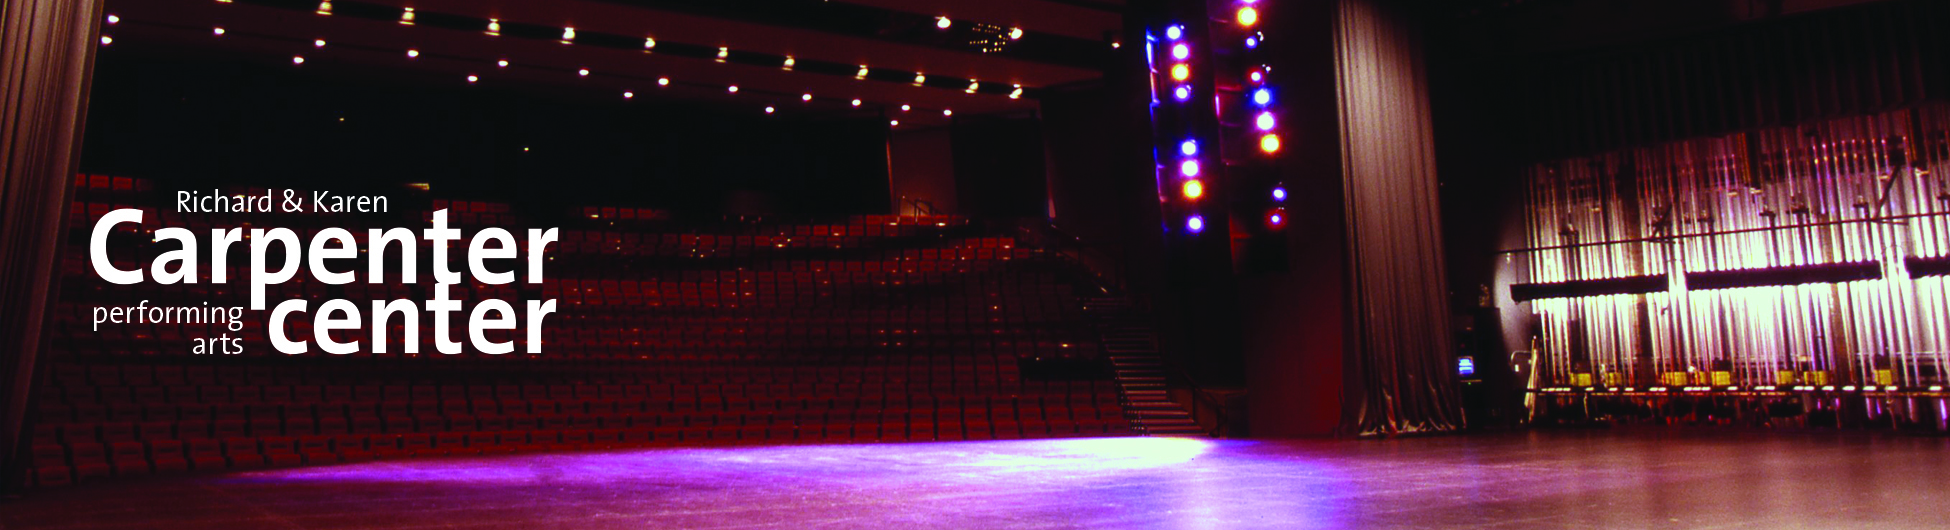 Carpenter Center logo on an image of the stage